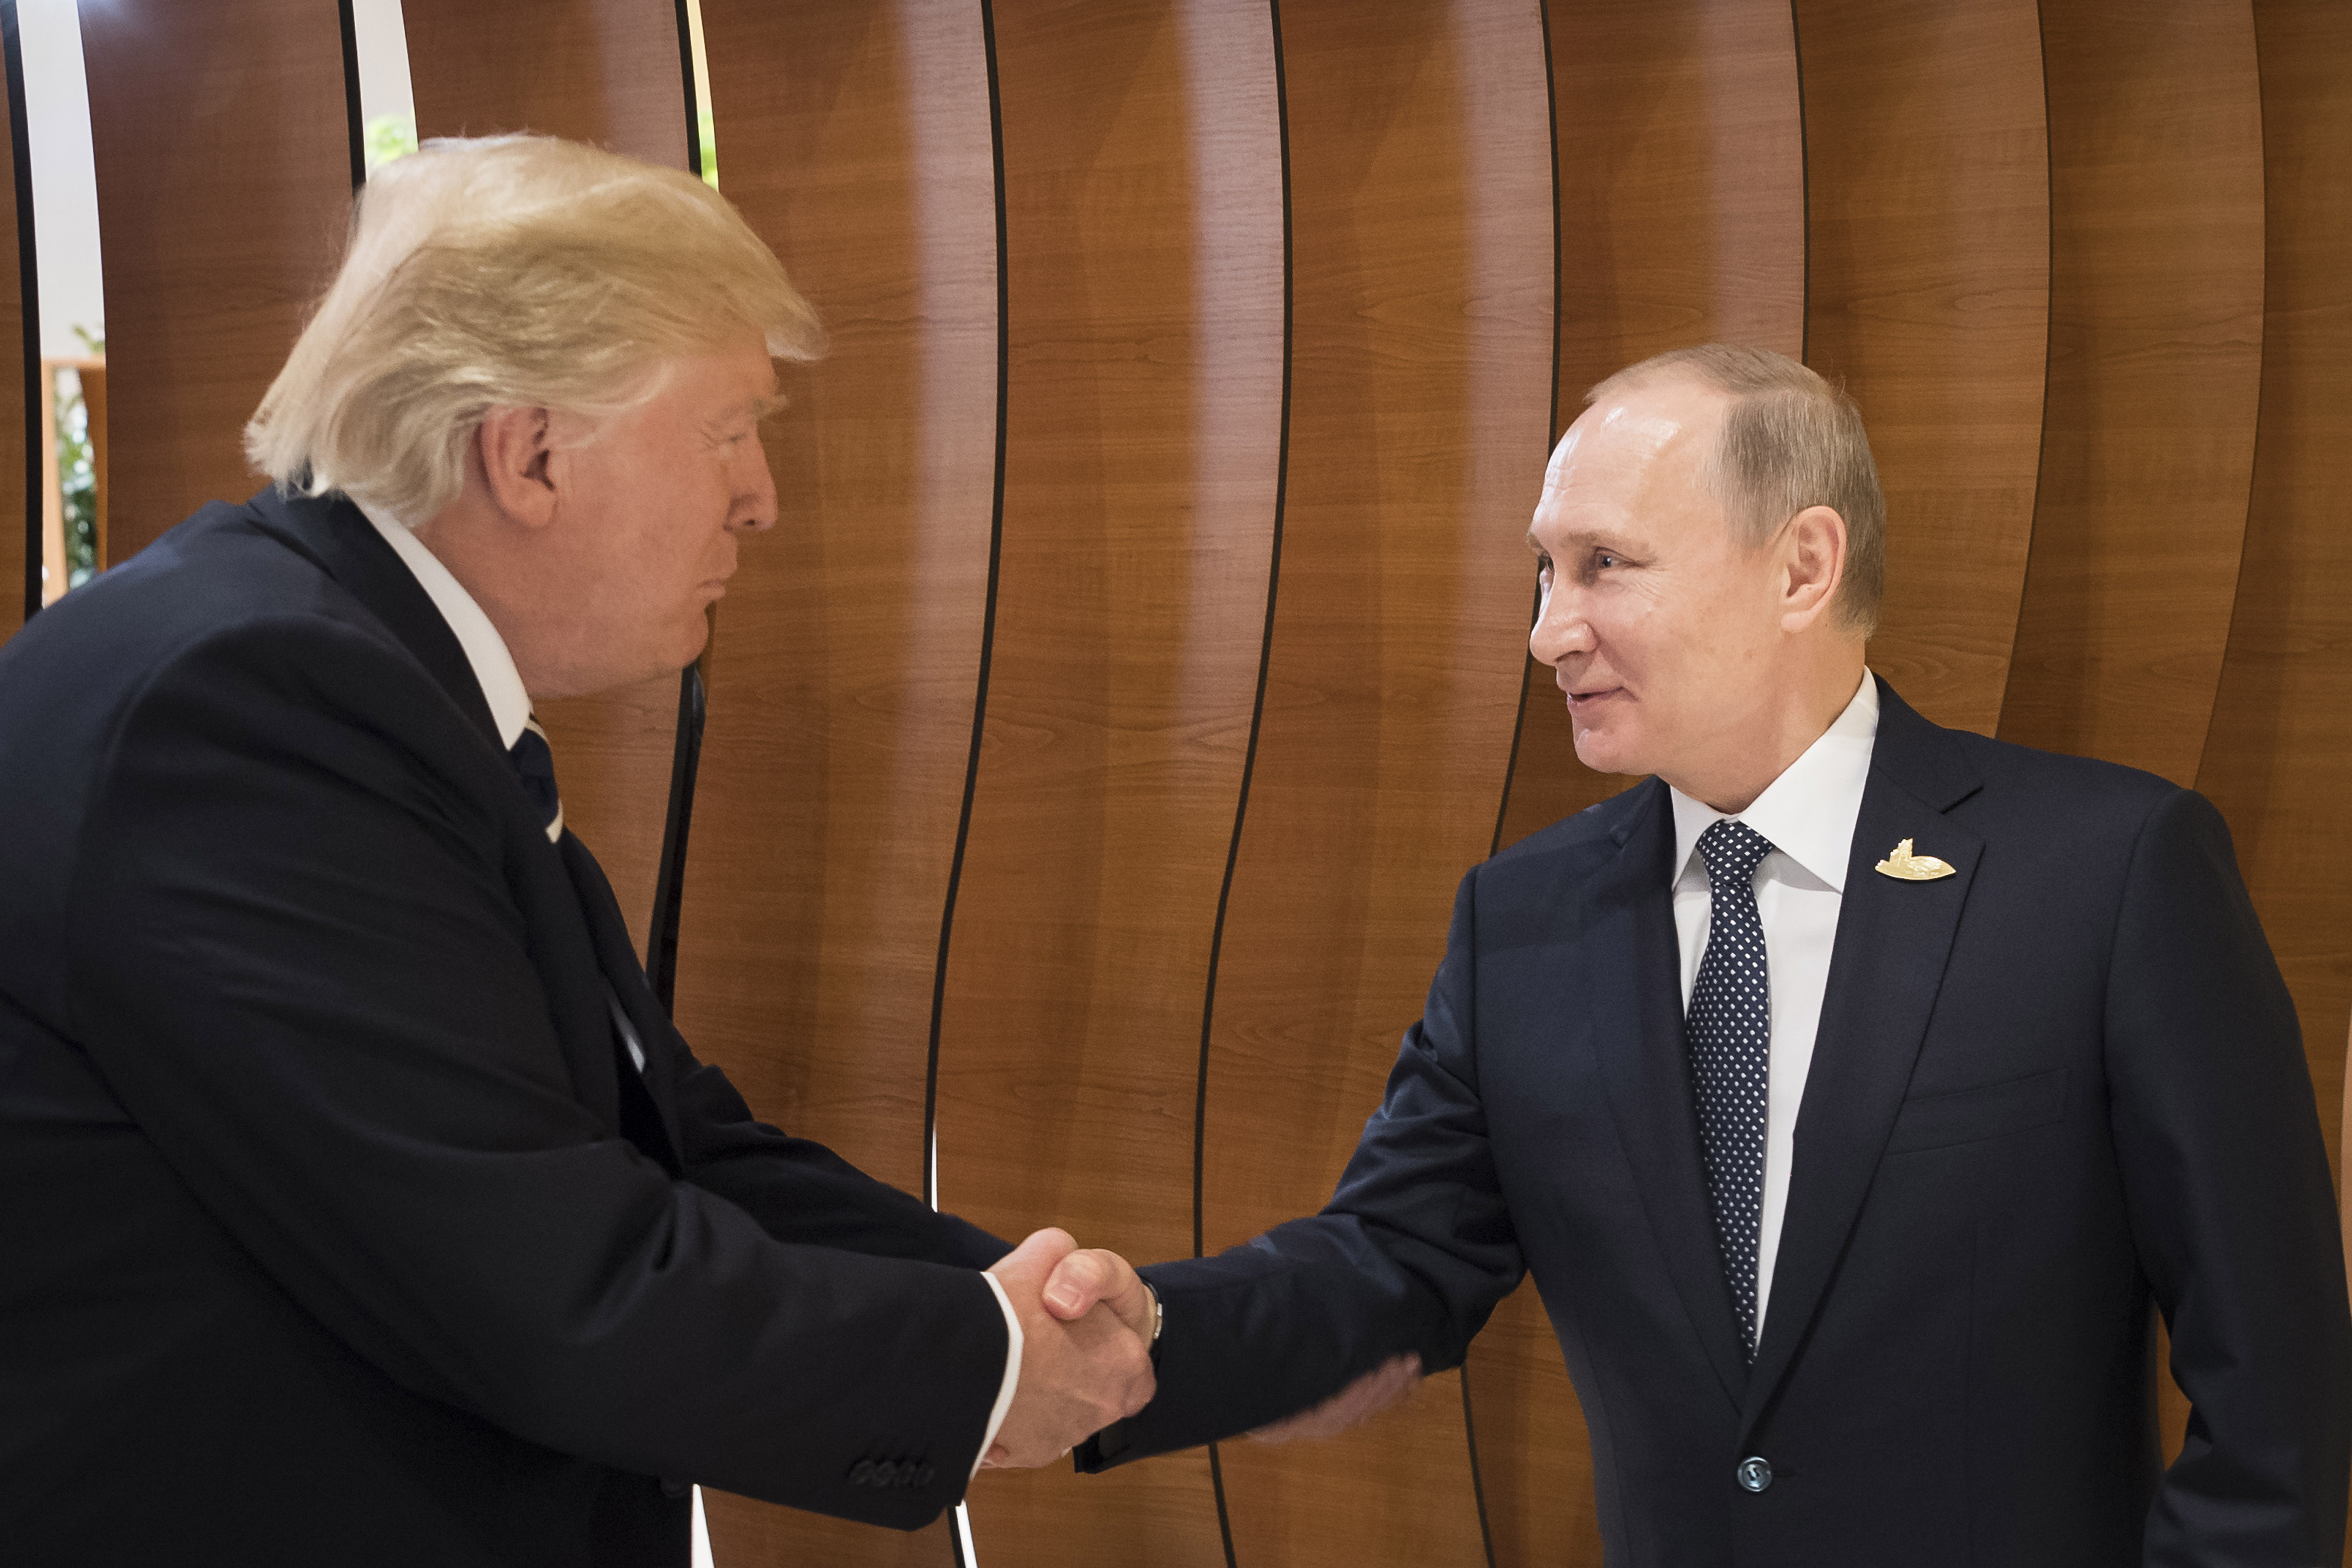 In this photo provided by the German Government Press Office (BPA) Donald Trump, President of the USA (left), meets Vladimir Putin, President of Russia (right), at the opening of the G20 summit on July 7, 2017 in Hamburg, Germany. (Steffen Kugler /BPA via Getty Images)